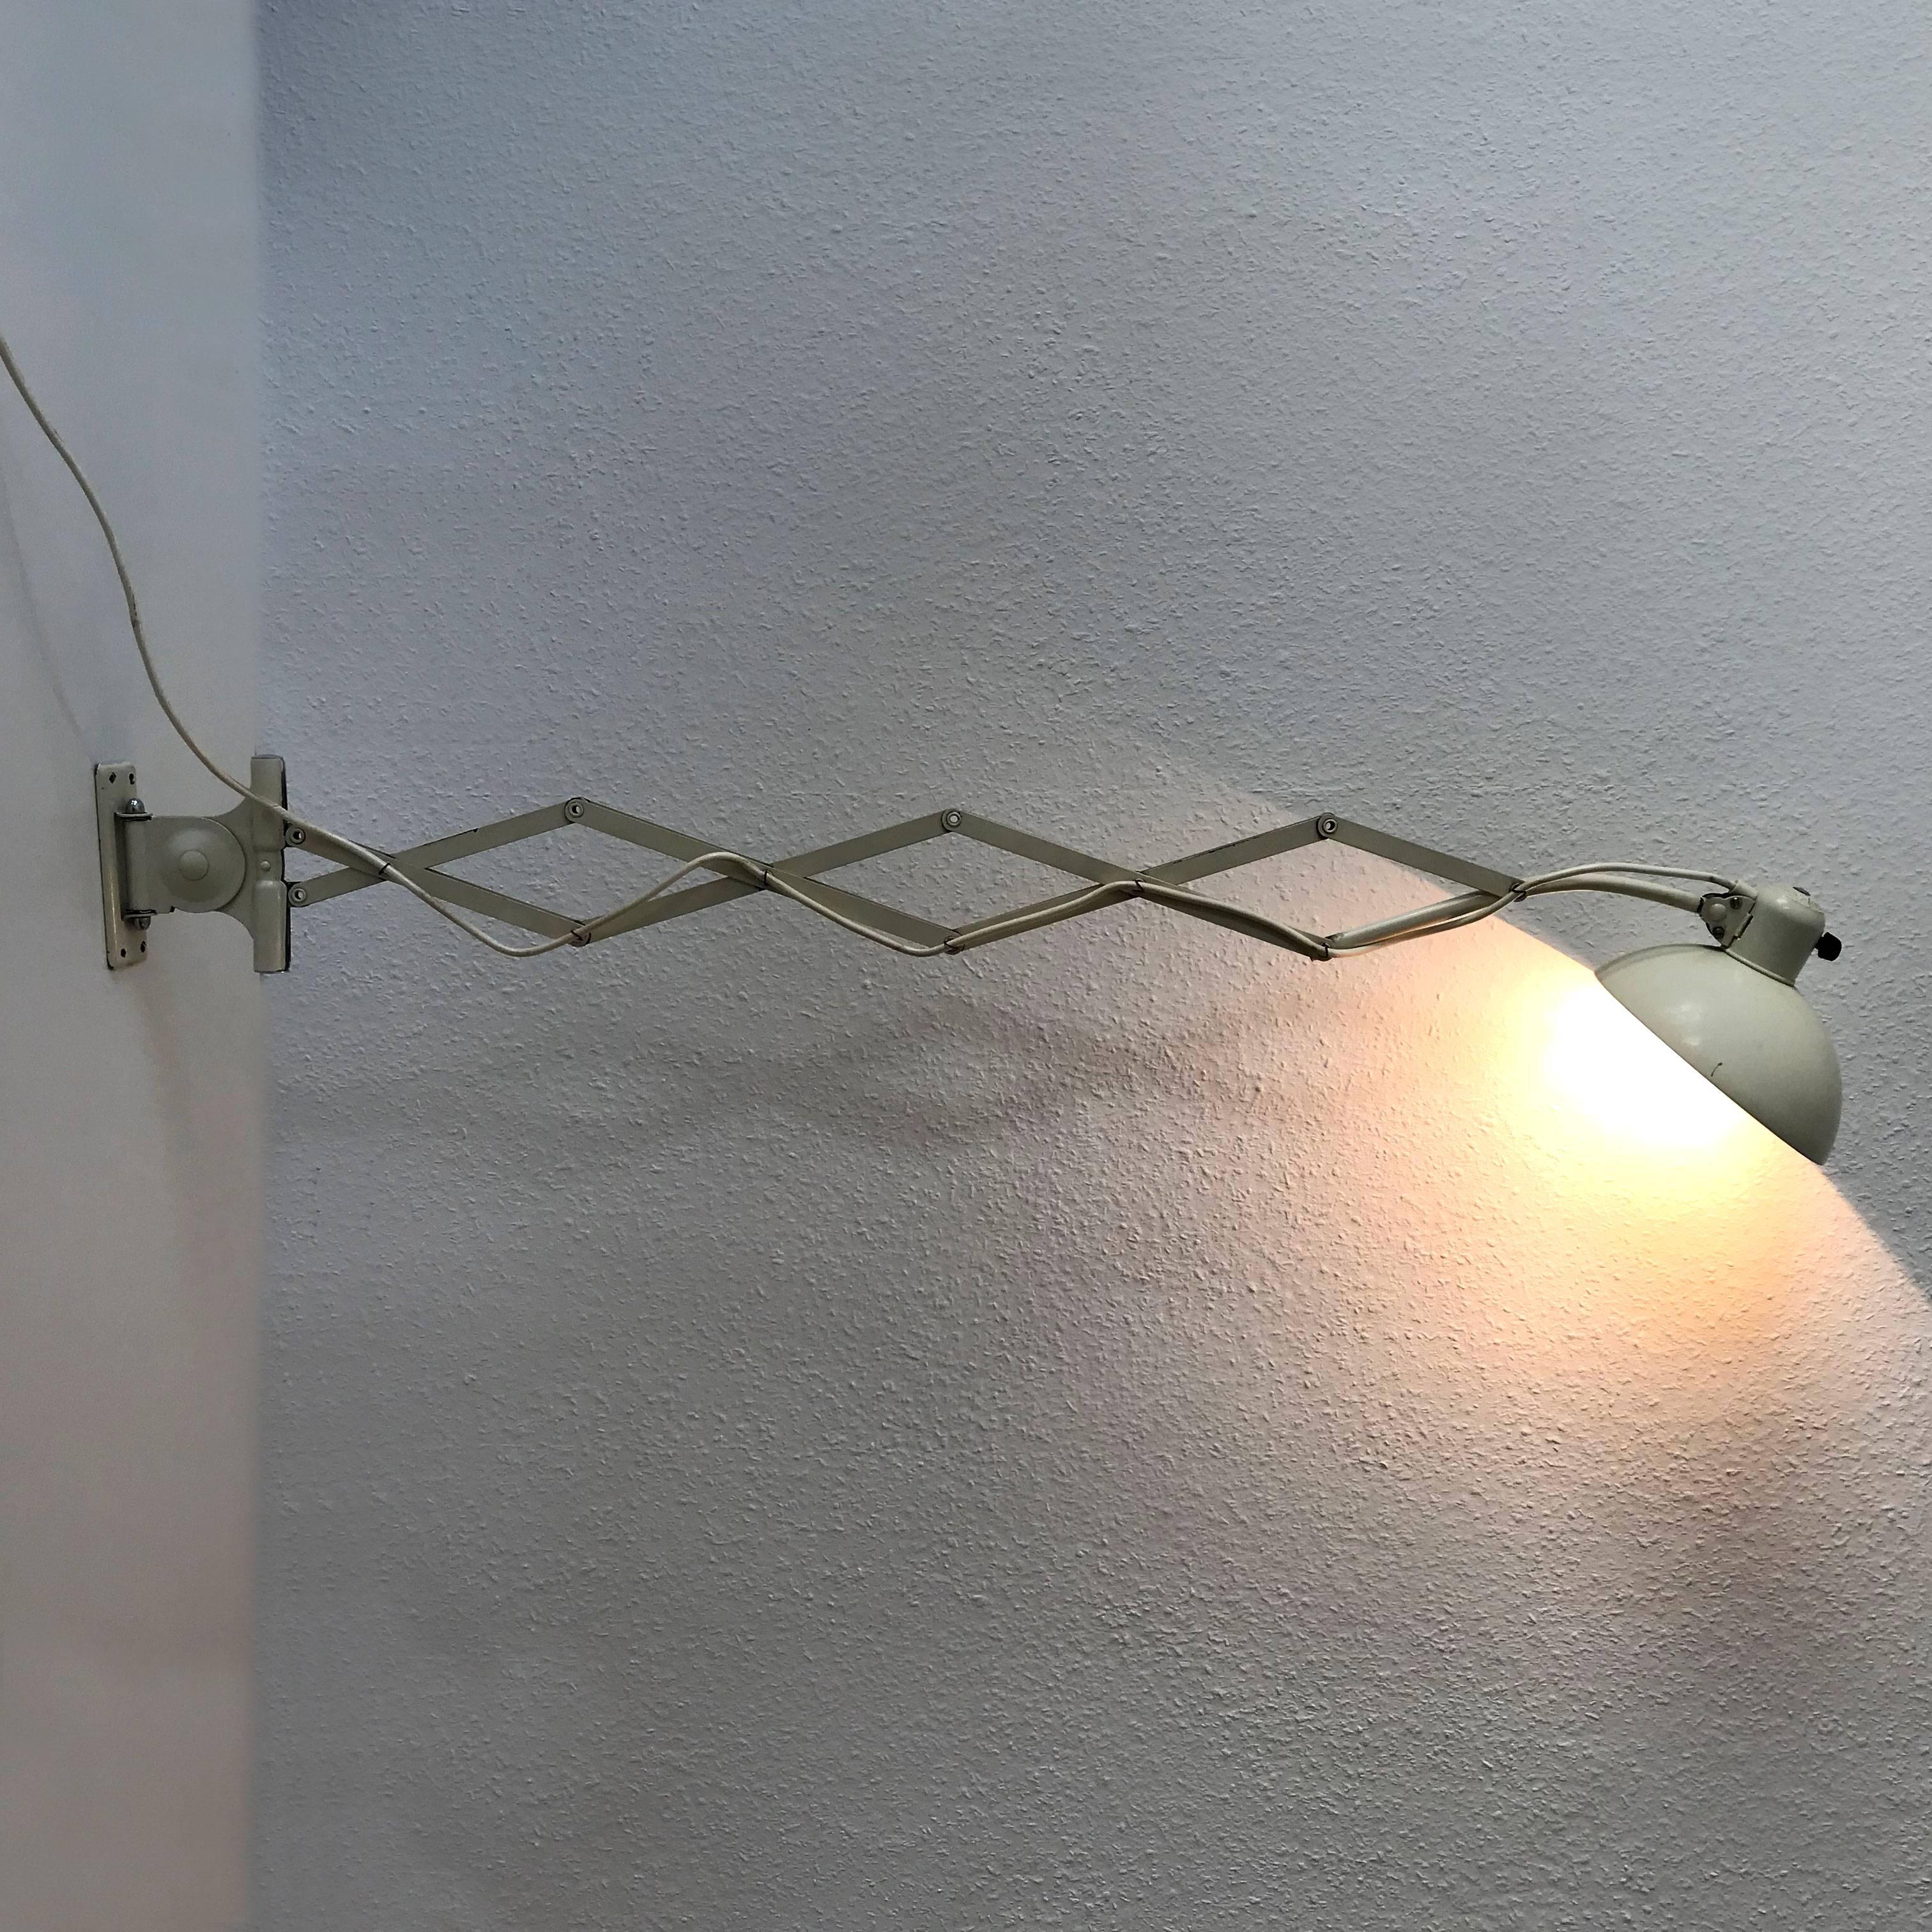 Huge and articulated Bauhaus Kaiser Idell scissor wall lamp. Model 6614 / 122. Designed by Bauhaus work master Christian Dell in 1930s for Kaiser Leuchten GmBH, Neheim-Hüsten, Germany. The lamp is produced in 1950s-1960s by Kaiser Leuchten (with